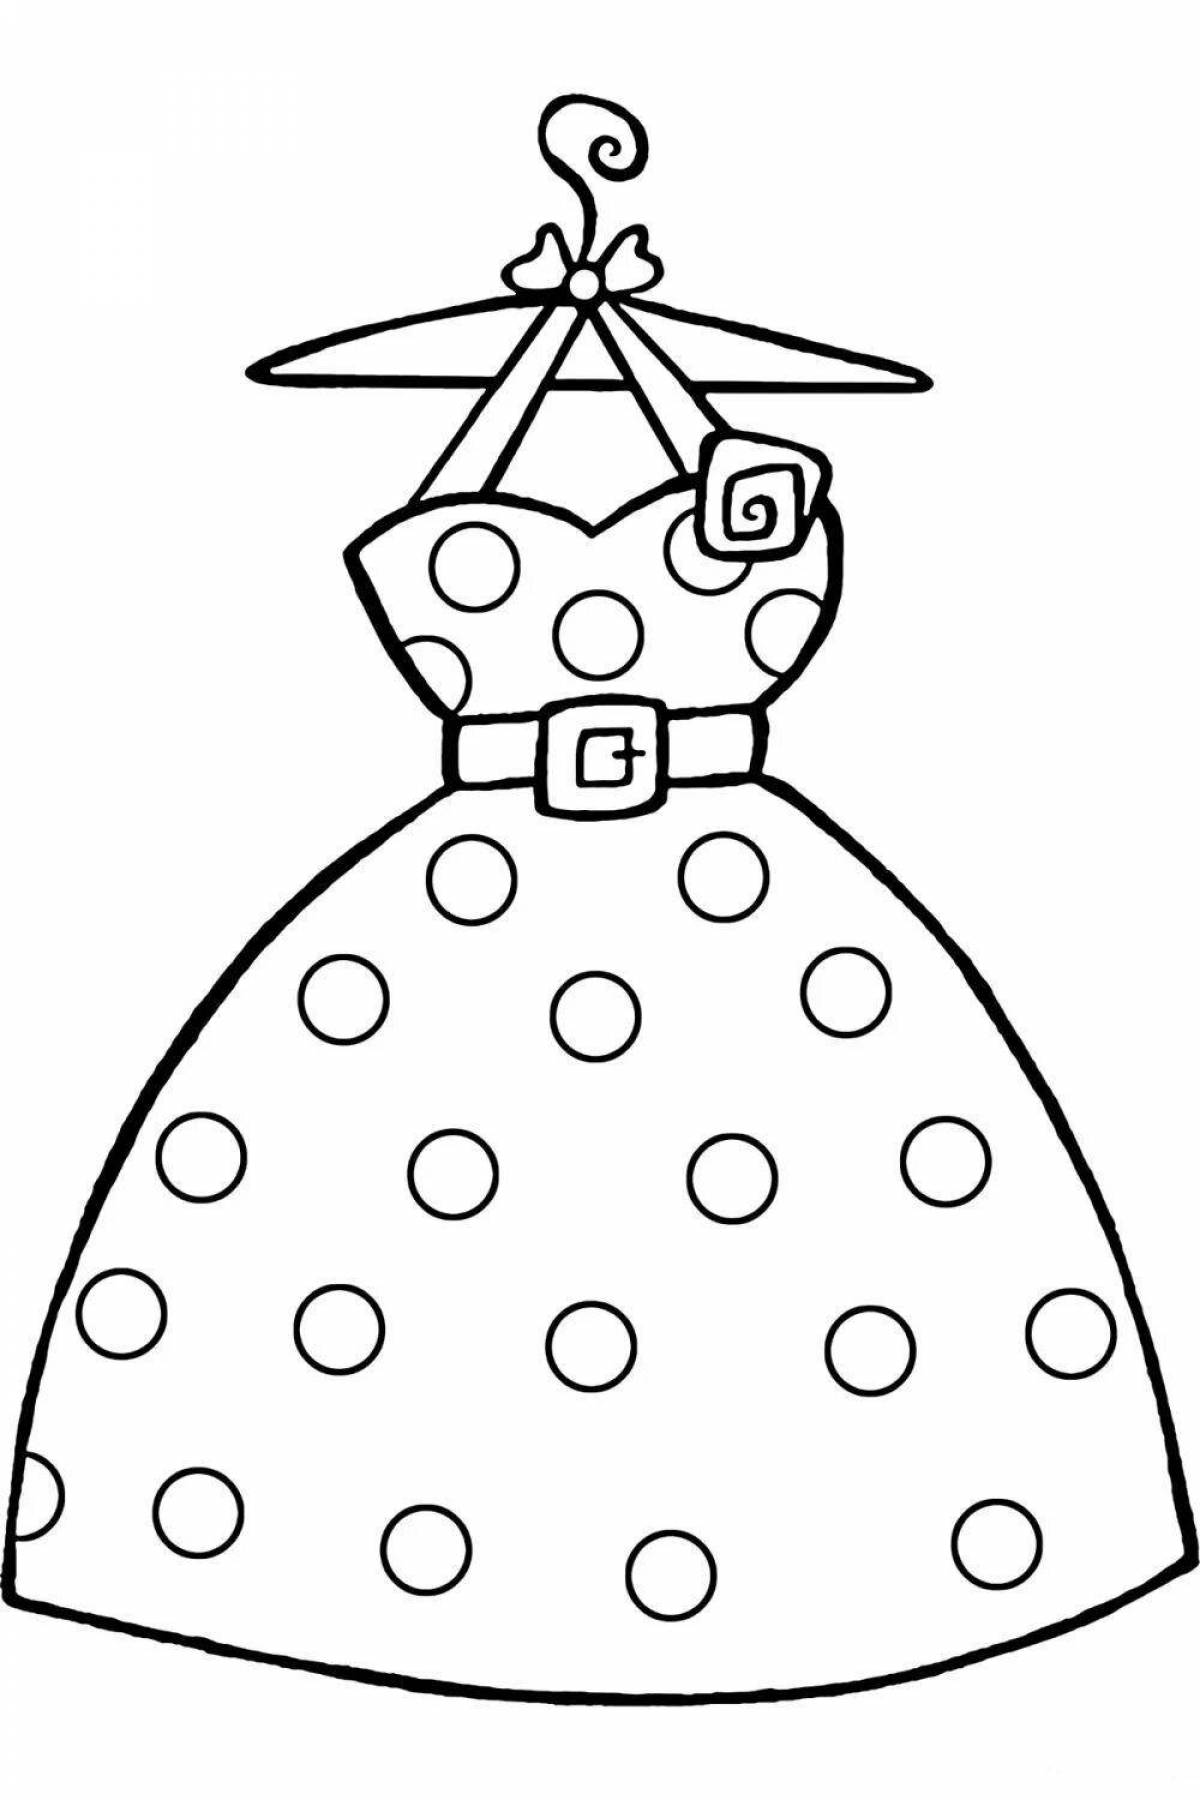 Coloring page funny dress for dolls